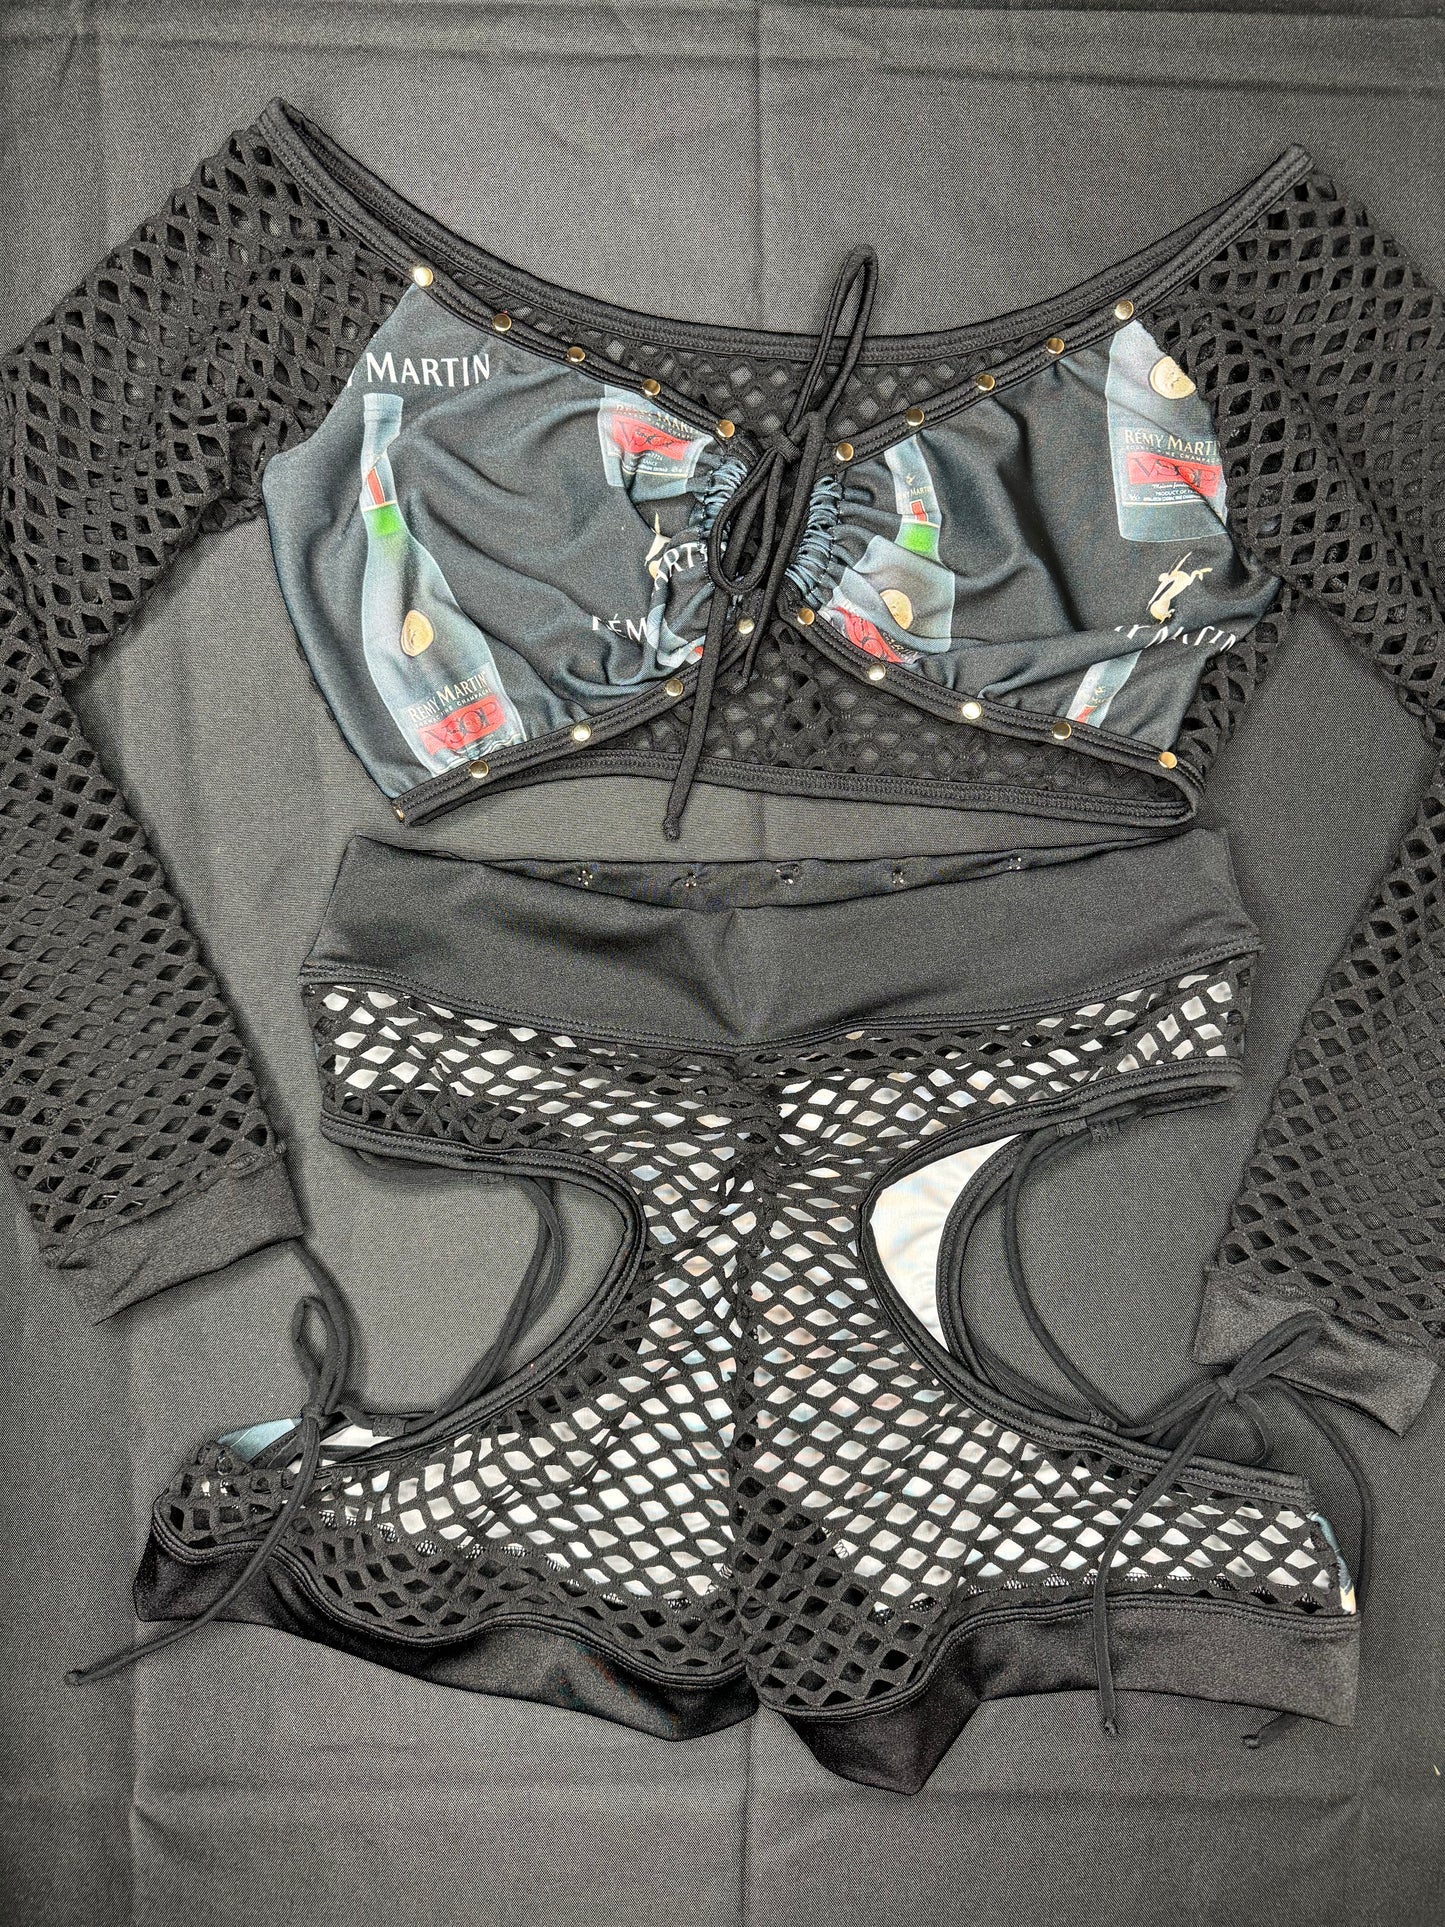 Black Long Sleeve/Shorts Two-Piece Exotic Dancer Outfit